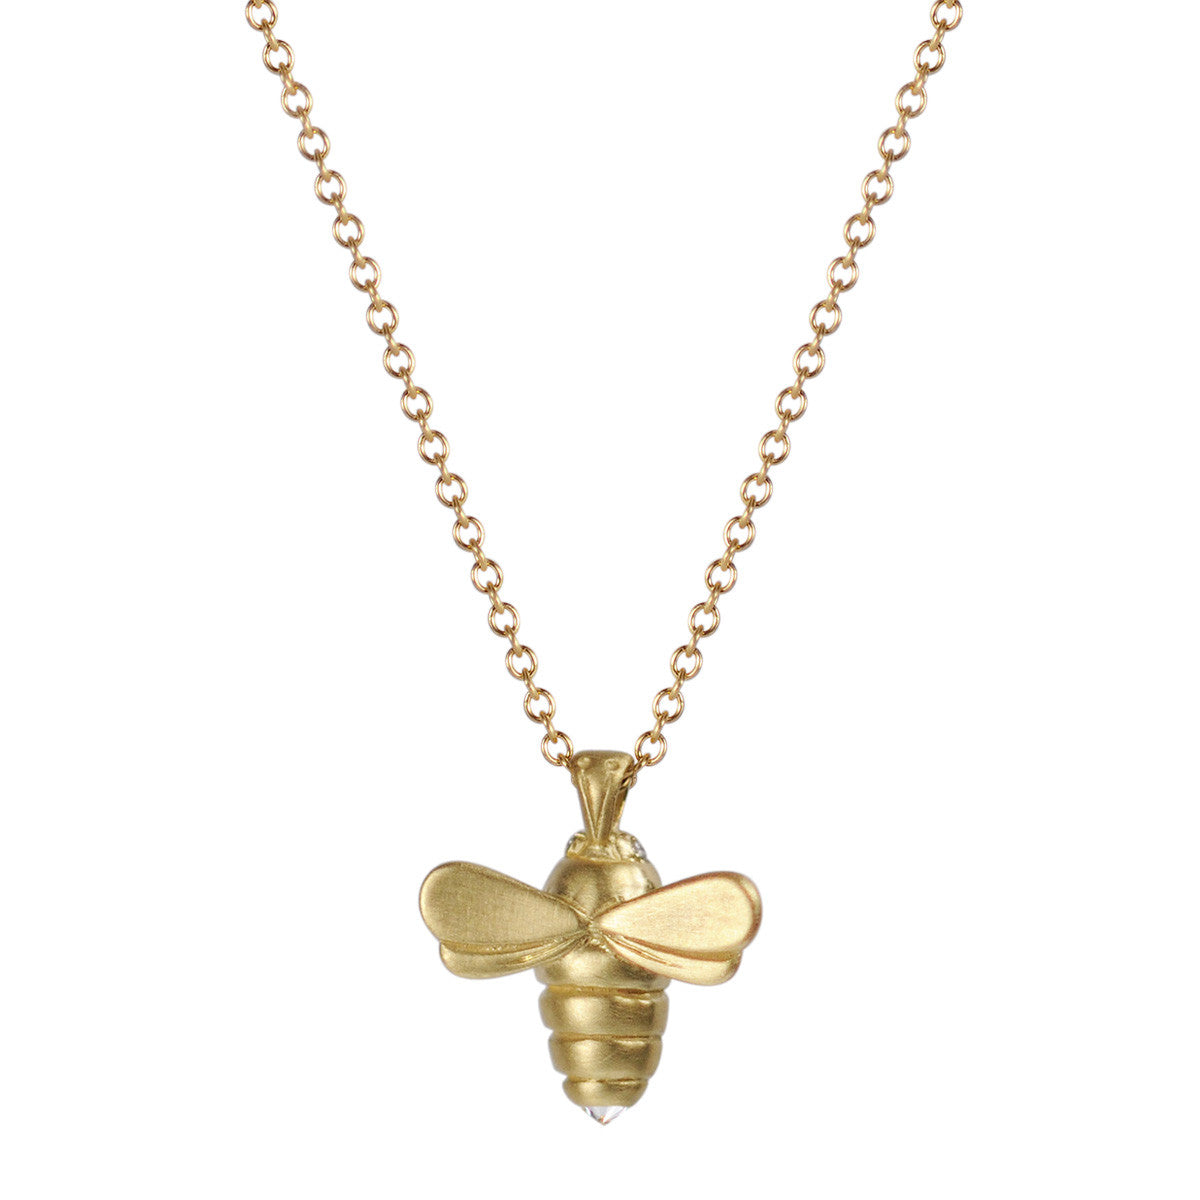 18K Gold Bumblebee Pendant with Diamond Eyes and Stinger